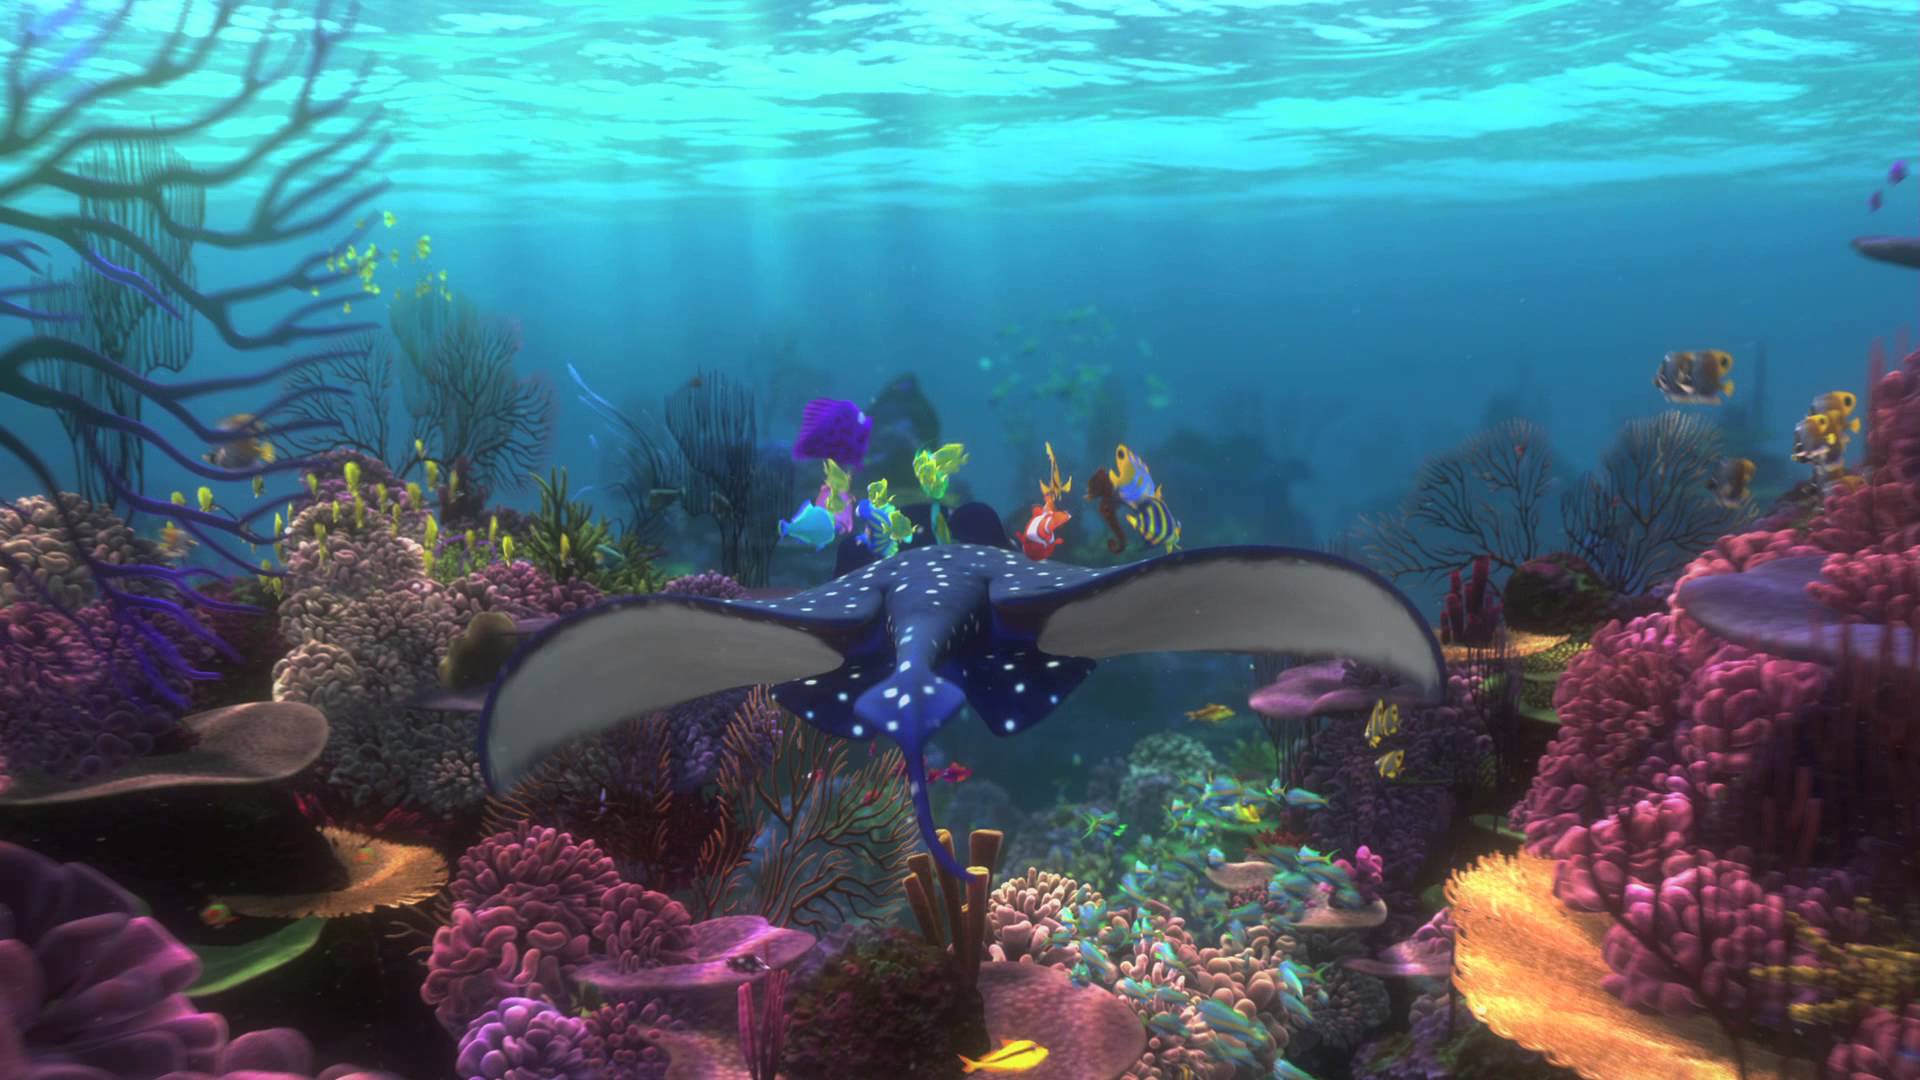 Free download Finding Nemo Backgrounds [1920x1080] for your ...